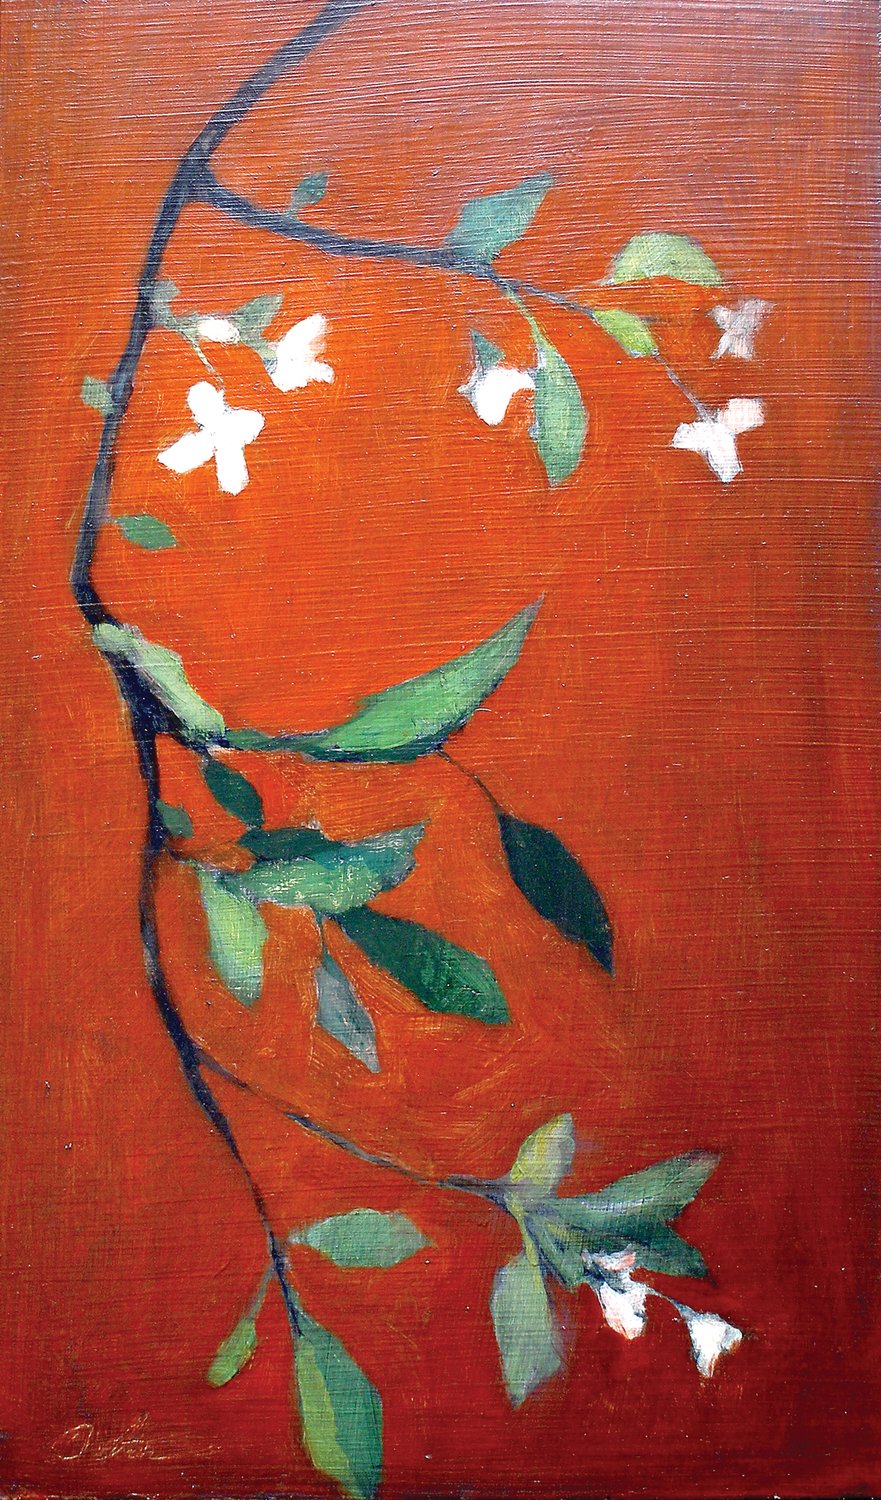 Blossoms on Red” is by David Stier.